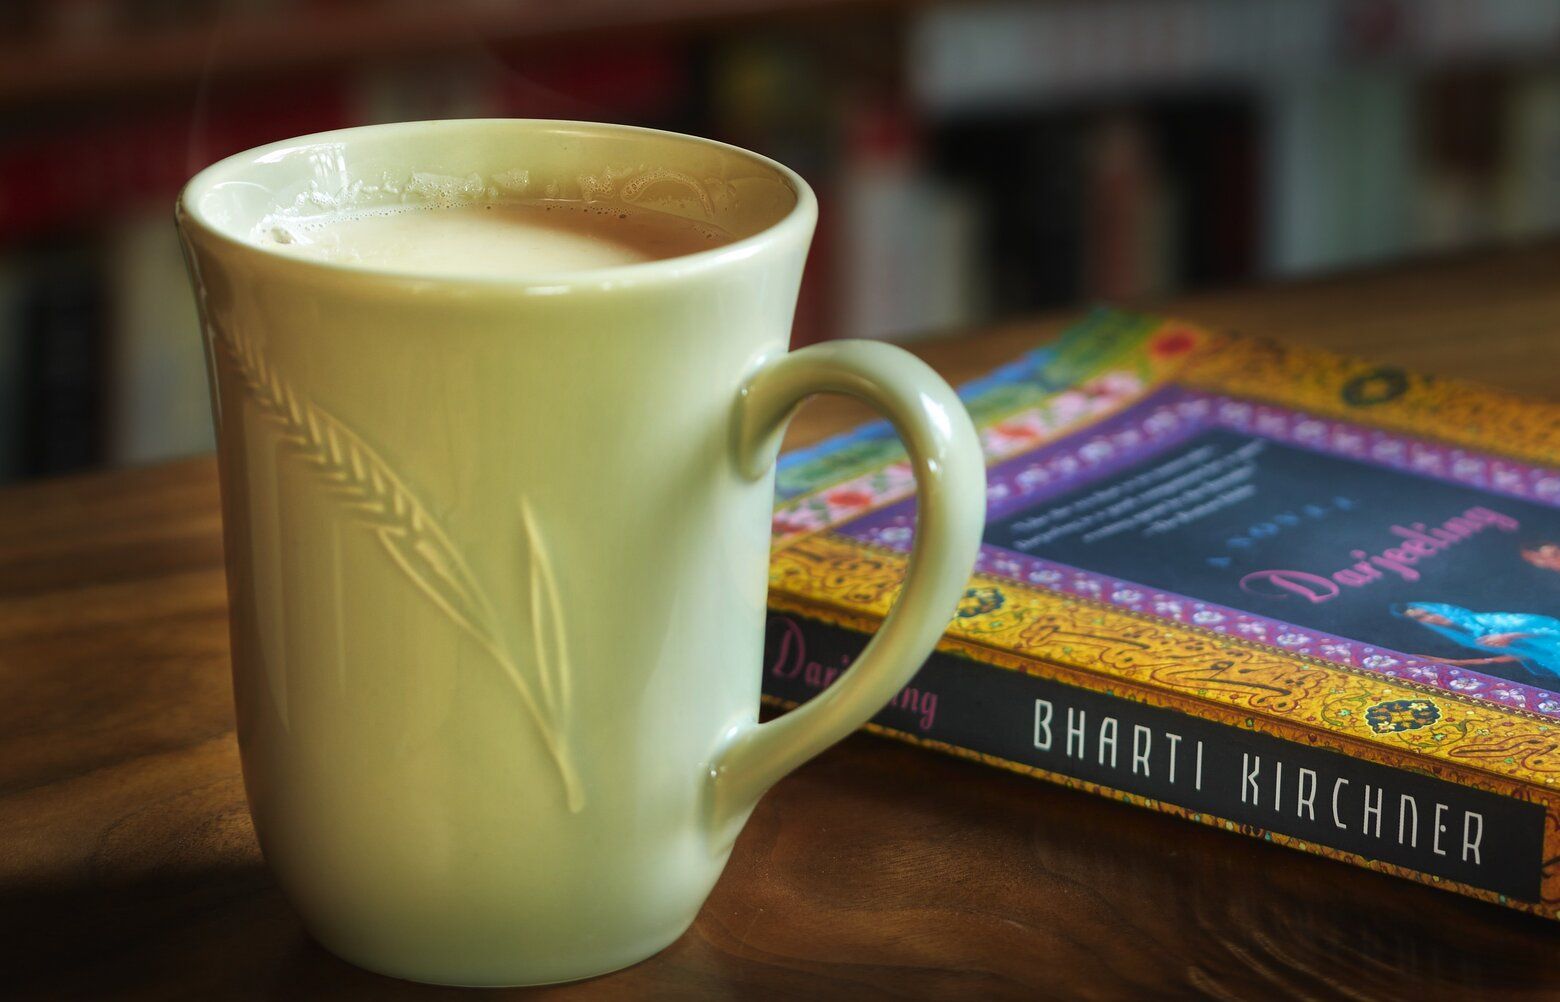 10 Best Masala Chai Blends to Make at Home (UK) | IW Blog